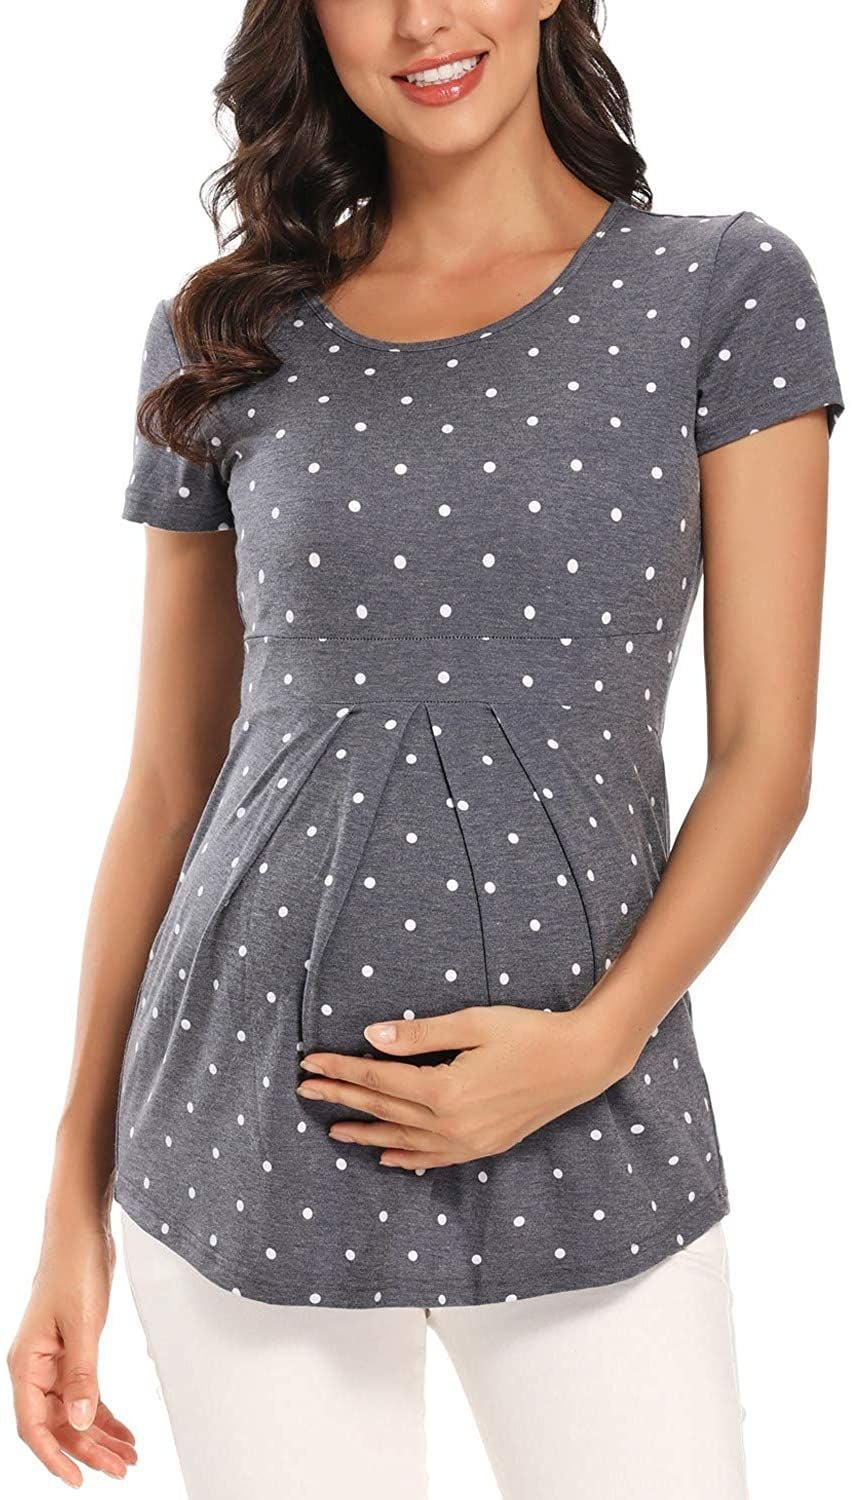 Maternity Top Clothing Gifts